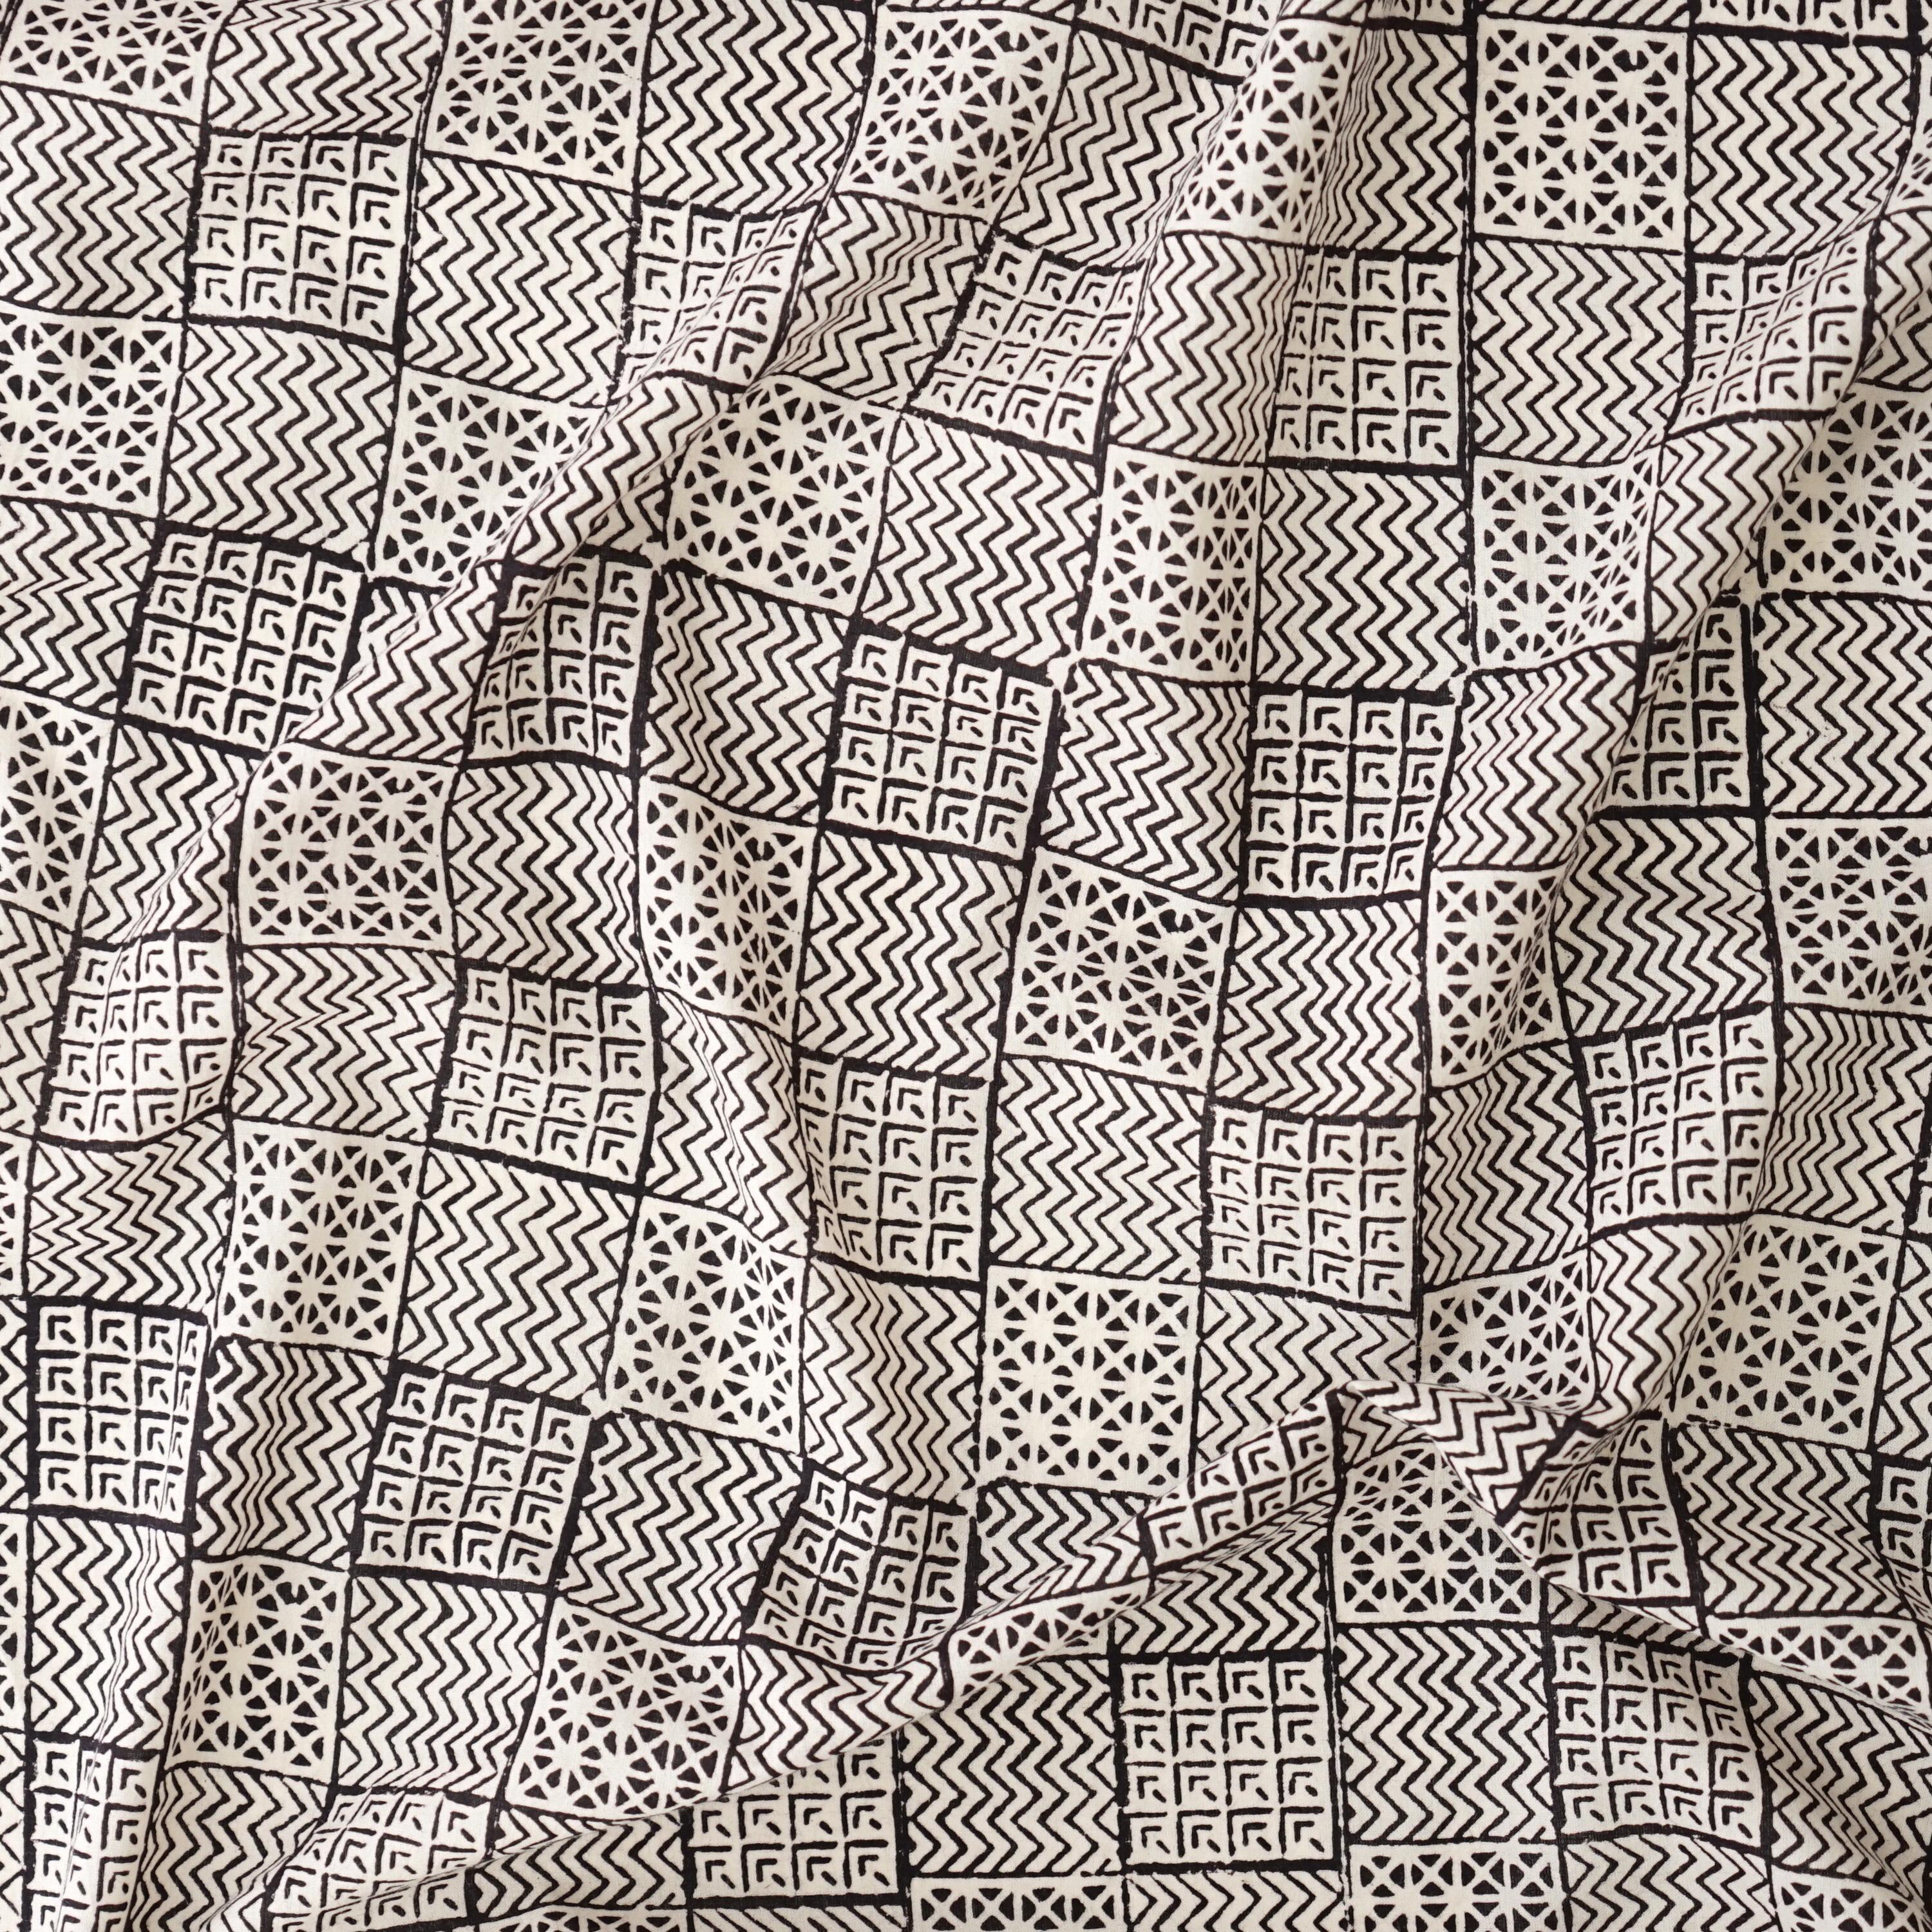 100% Block-Printed Cotton Fabric From India- Bagh - Iron Rust Black Combo Print - Contrast